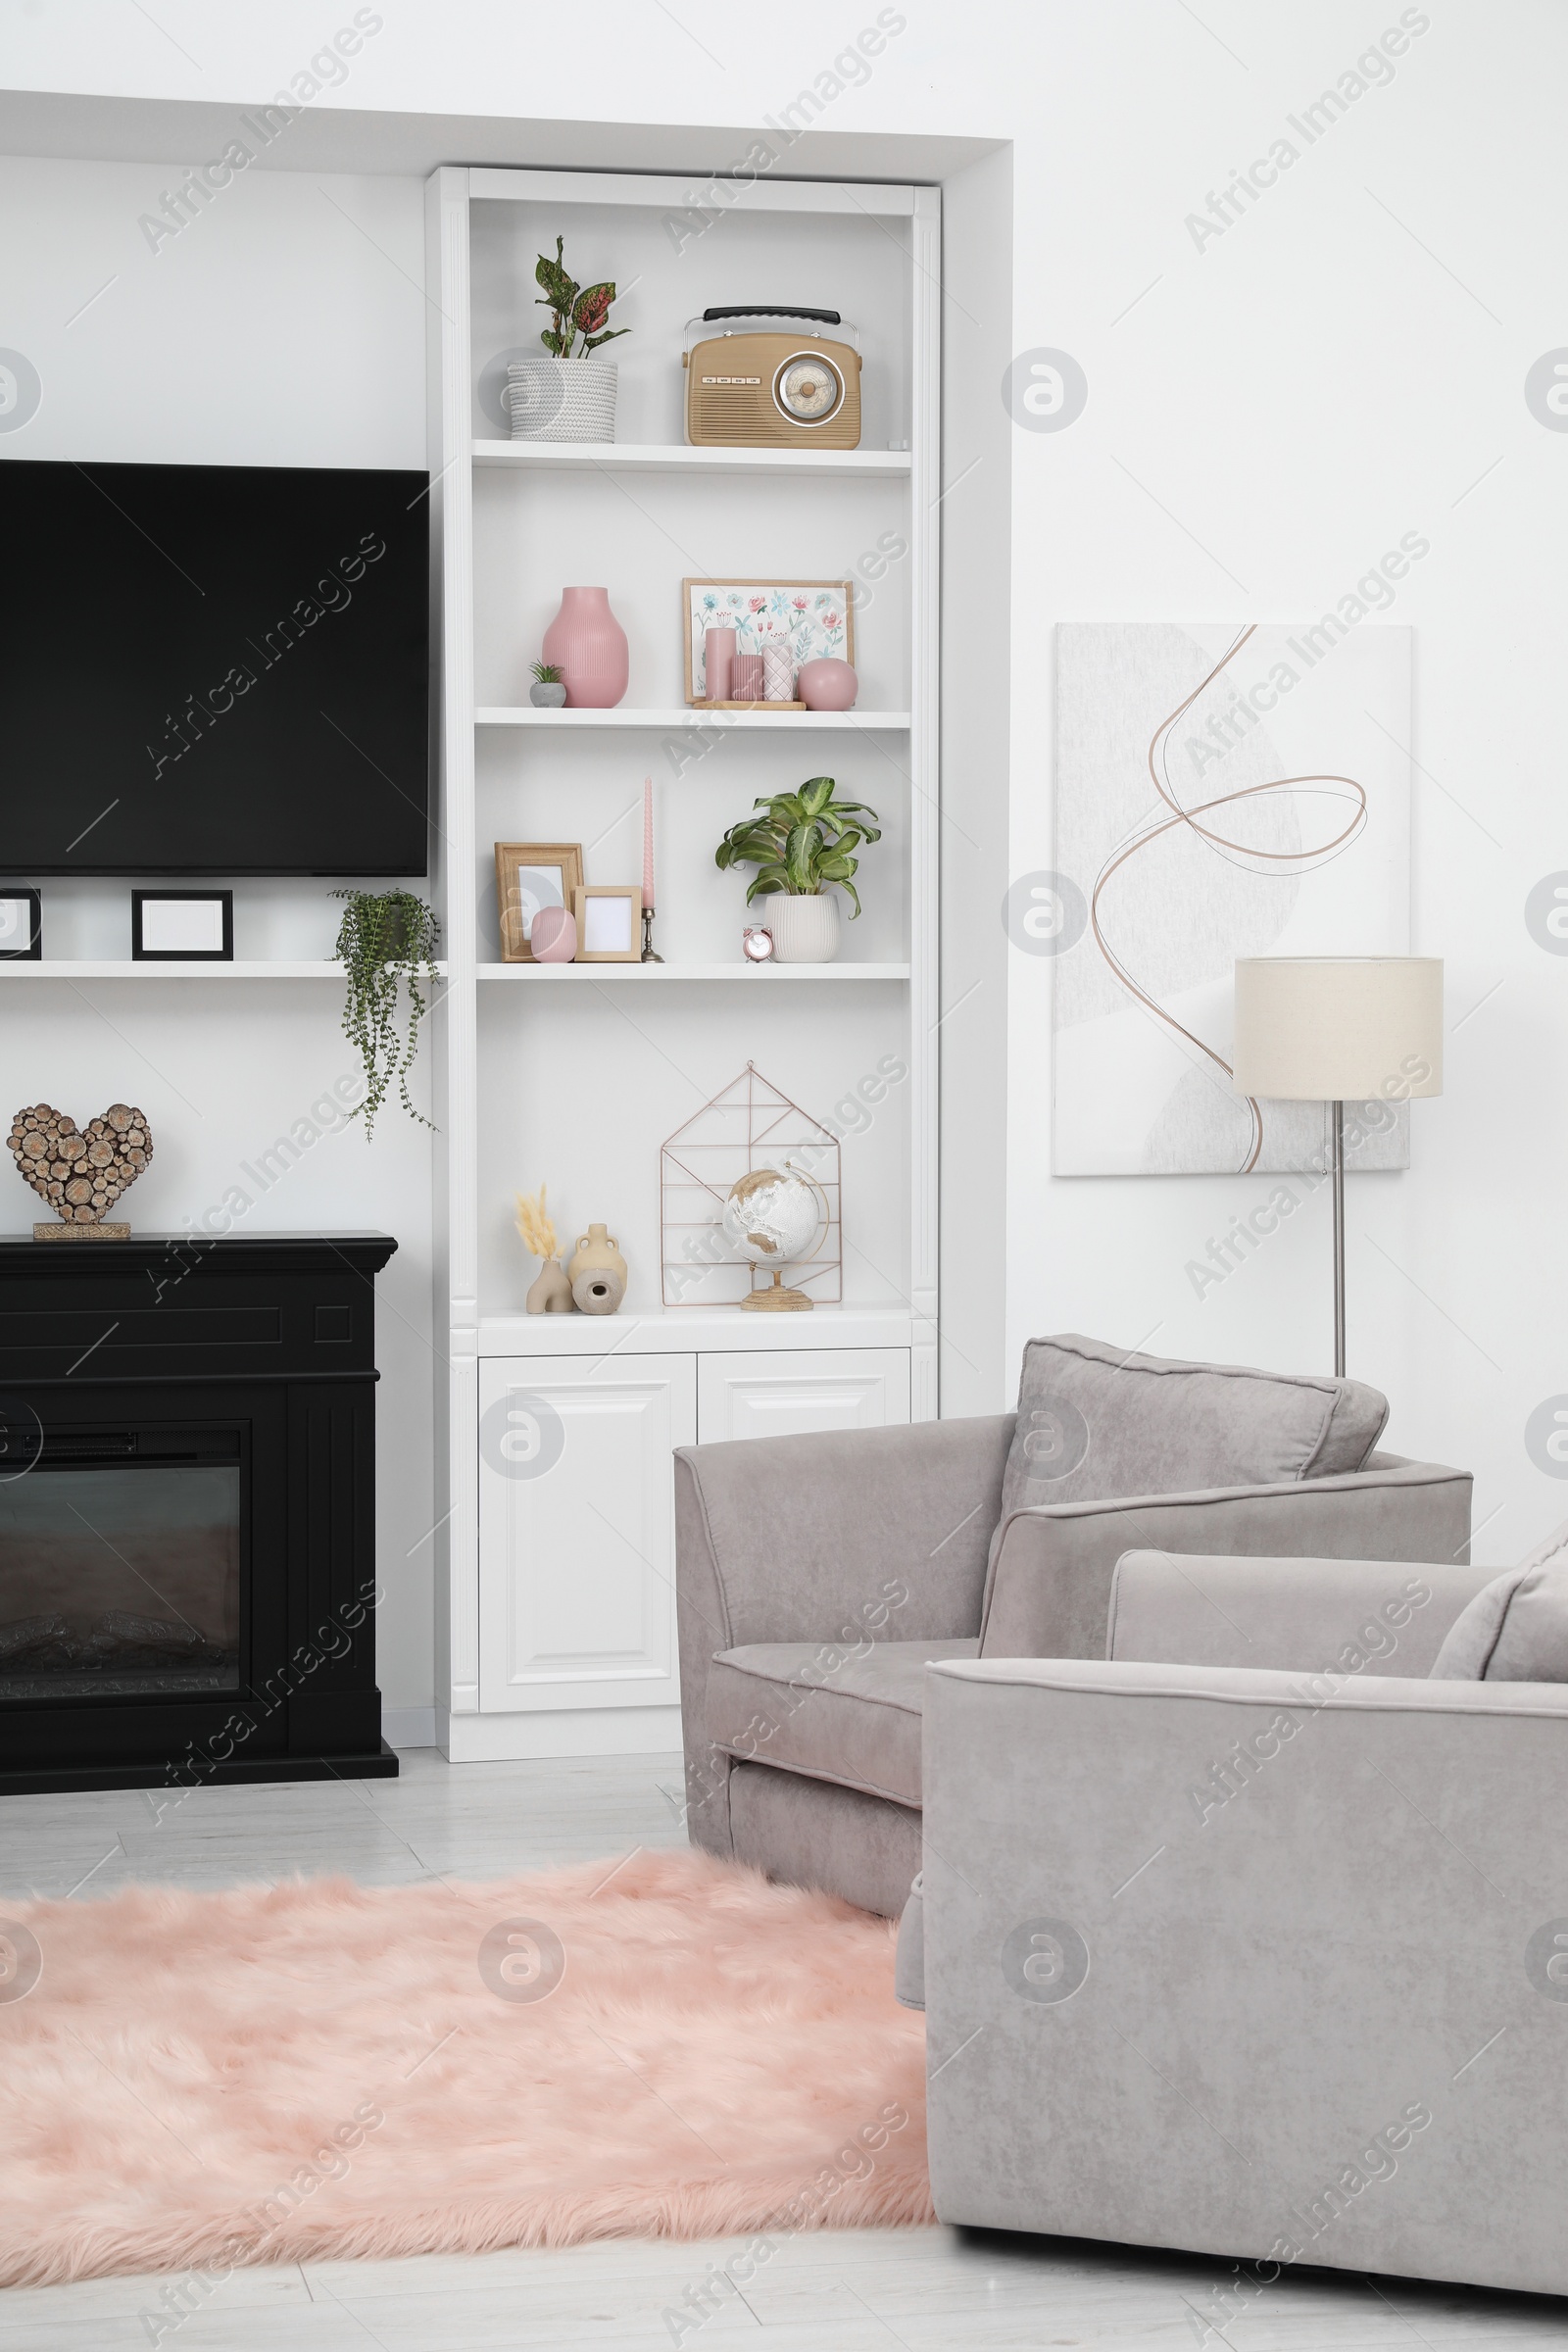 Photo of Stylish room interior with beautiful fireplace, TV set, armchairs and shelves with decor